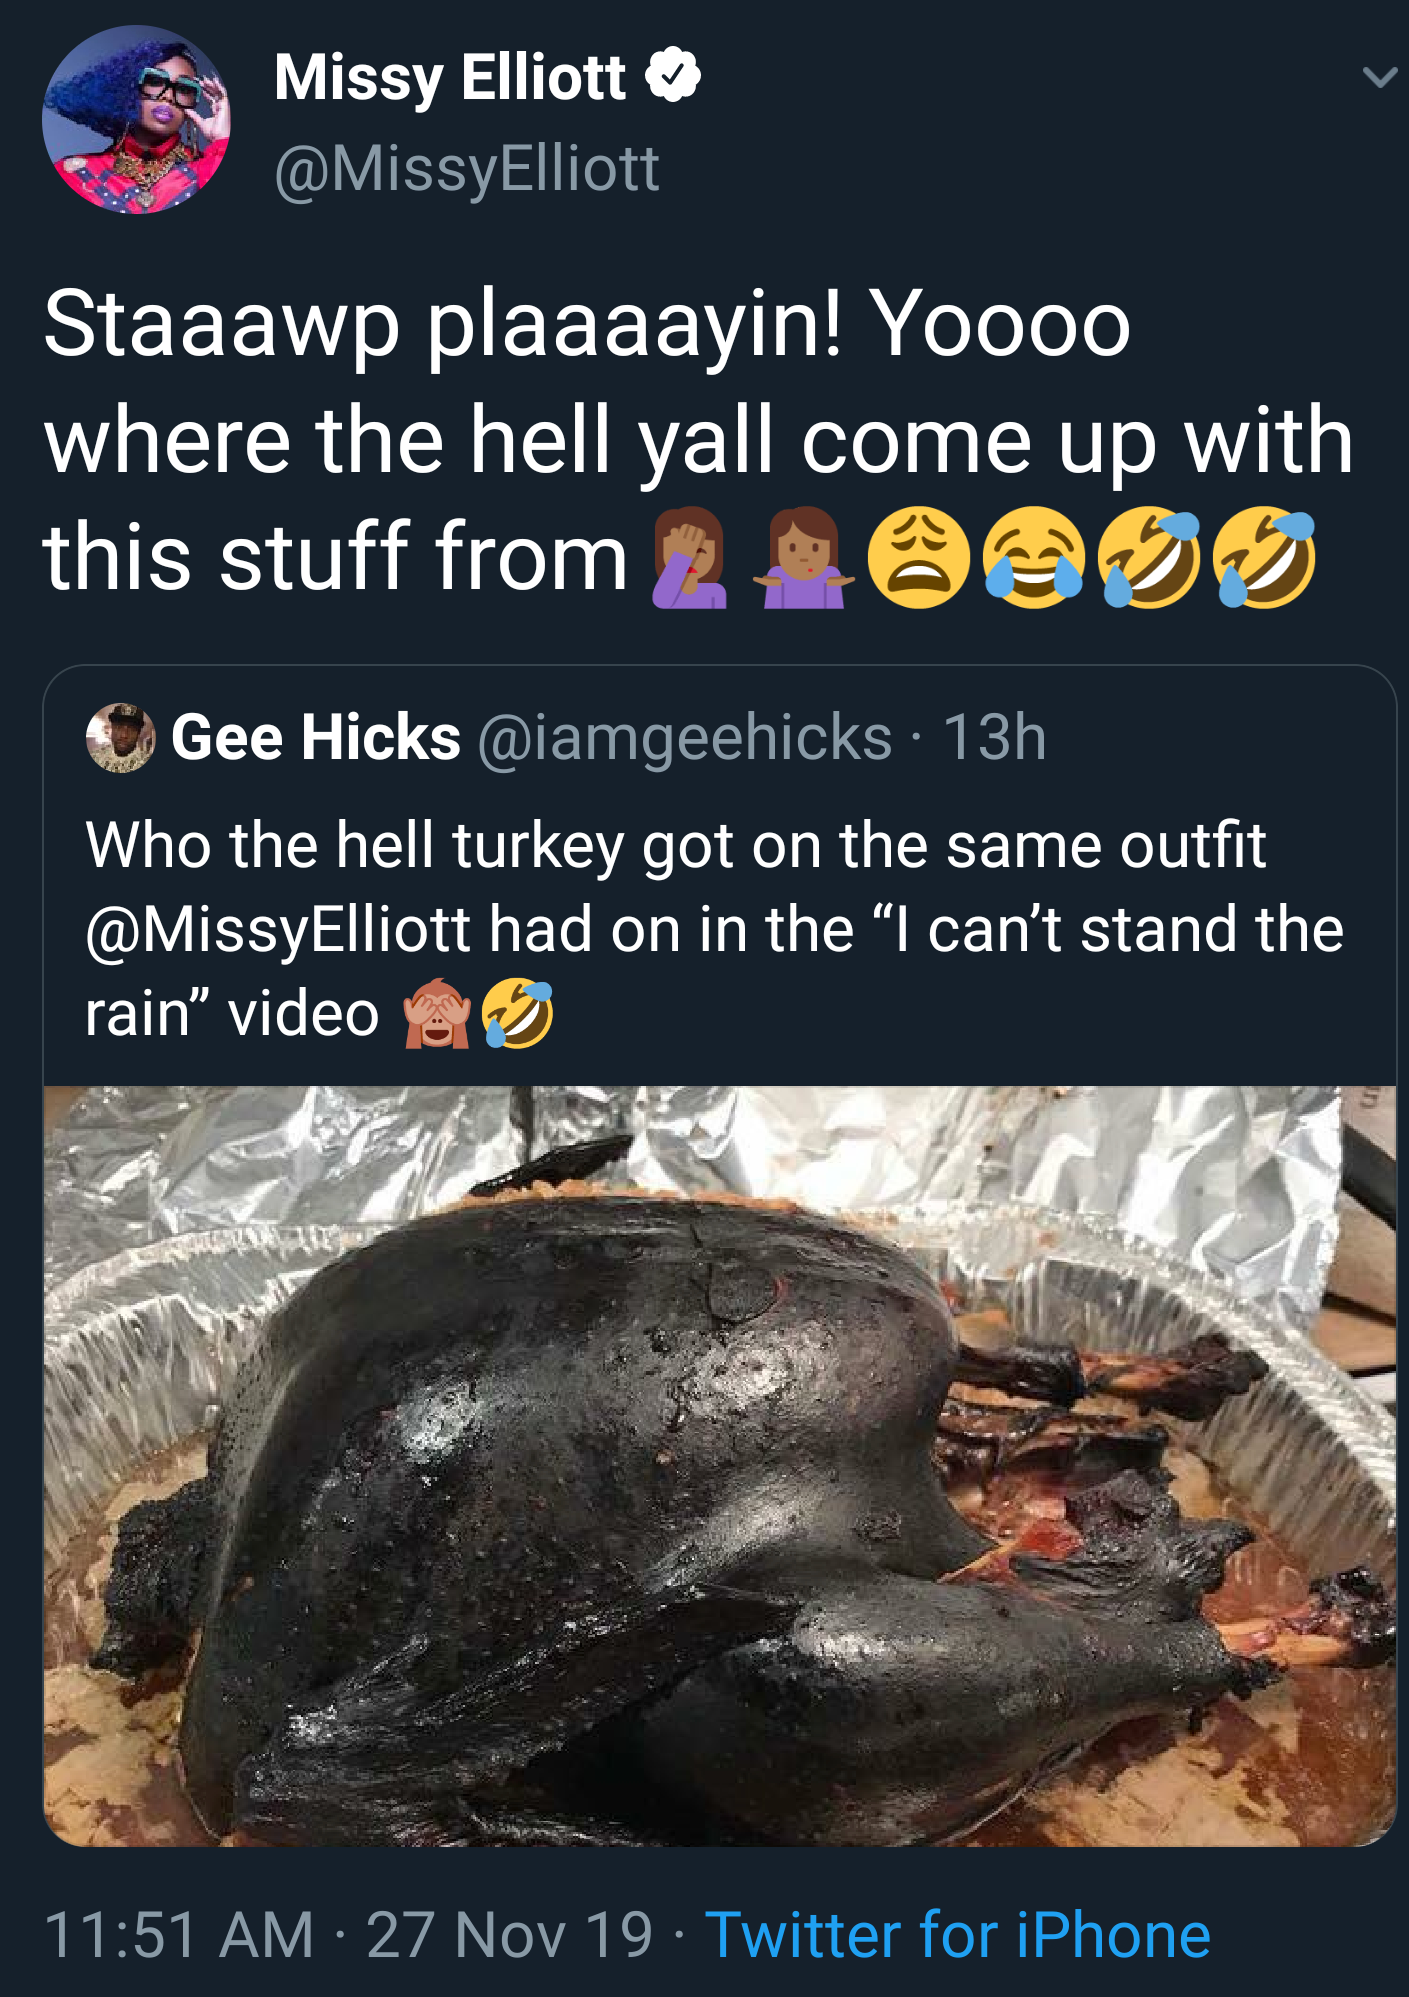 photo caption - Missy Elliott Elliott Staaawp plaaaayin! Yoooo where the hell yall come up with this stuff from 2 000 Gee Hicks 13h Who the hell turkey got on the same outfit Elliott had on in the "I can't stand the rain" video 27 Nov 19. Twitter for iPho